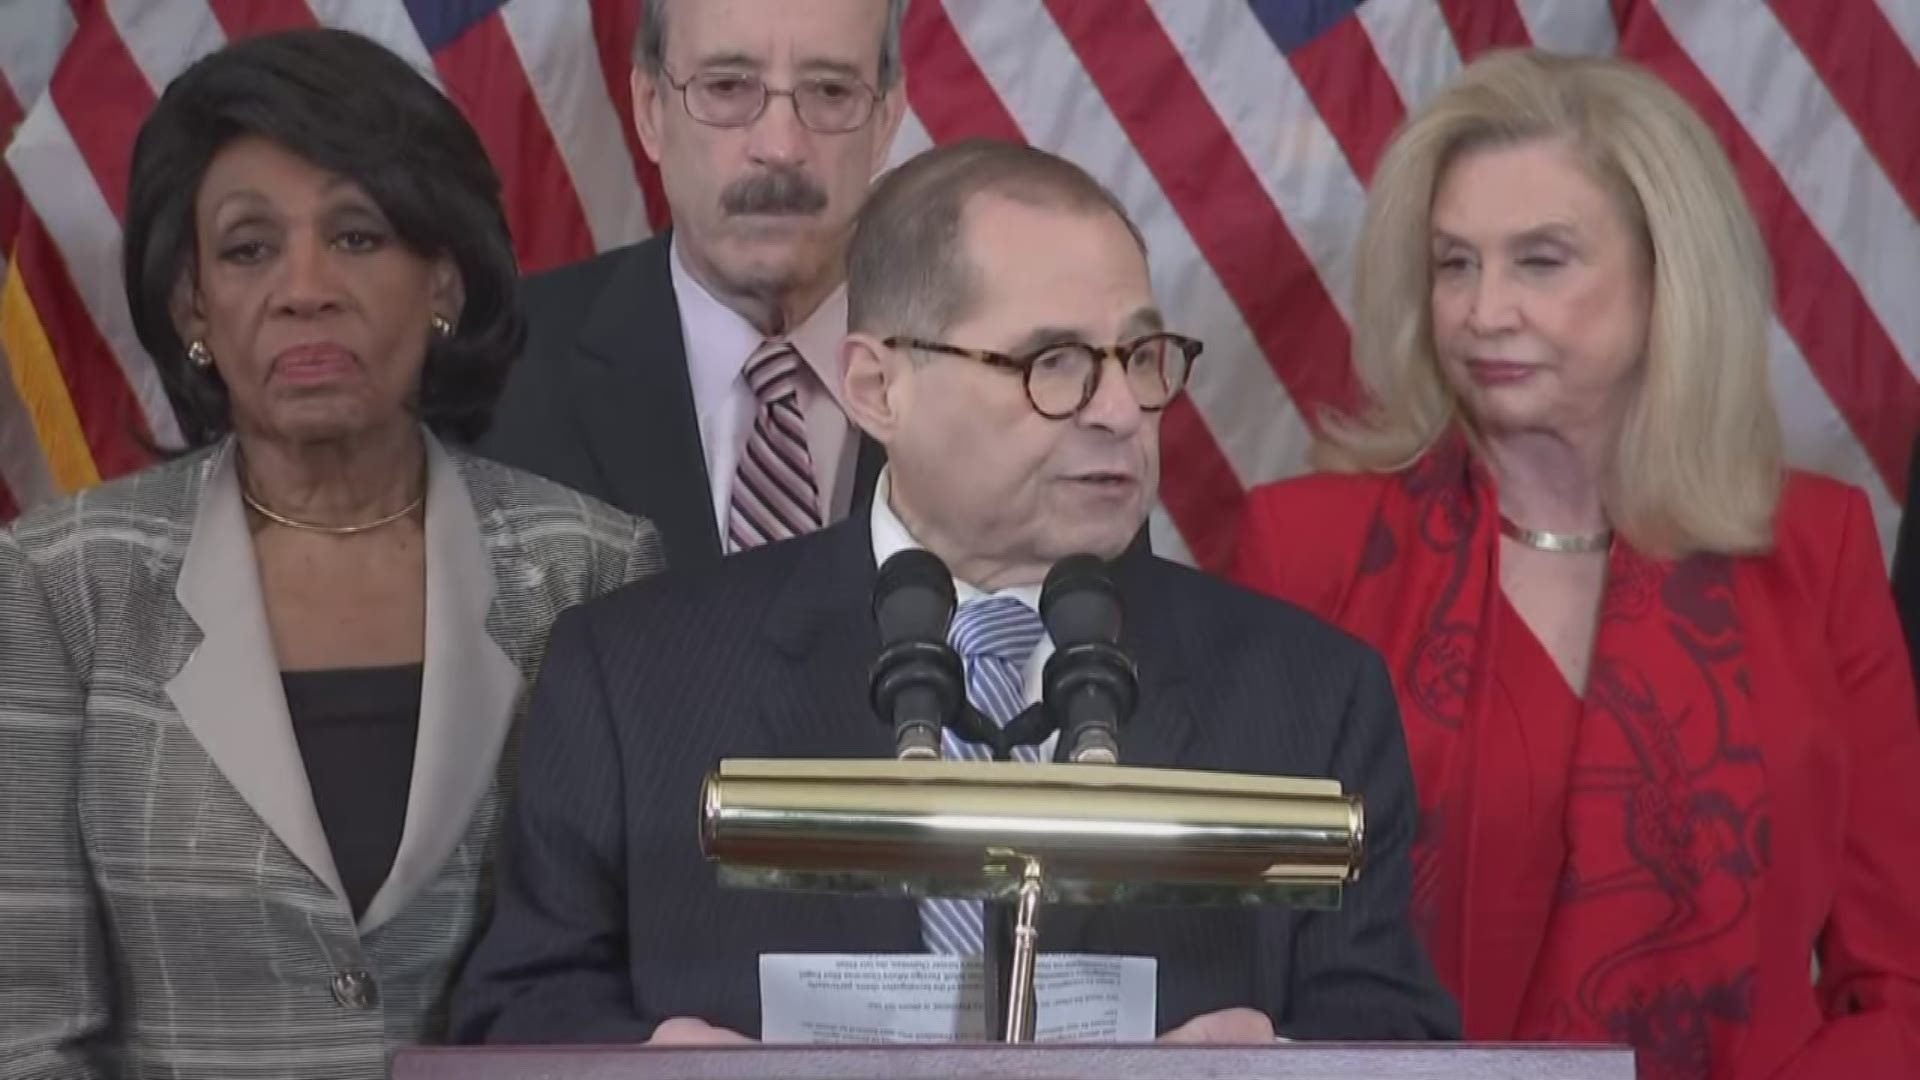 House Judiciary Committee Chairman Rep. Jerrold Nadler announced articles of impeachment charging President Trump with abuse of power and obstruction of justice.